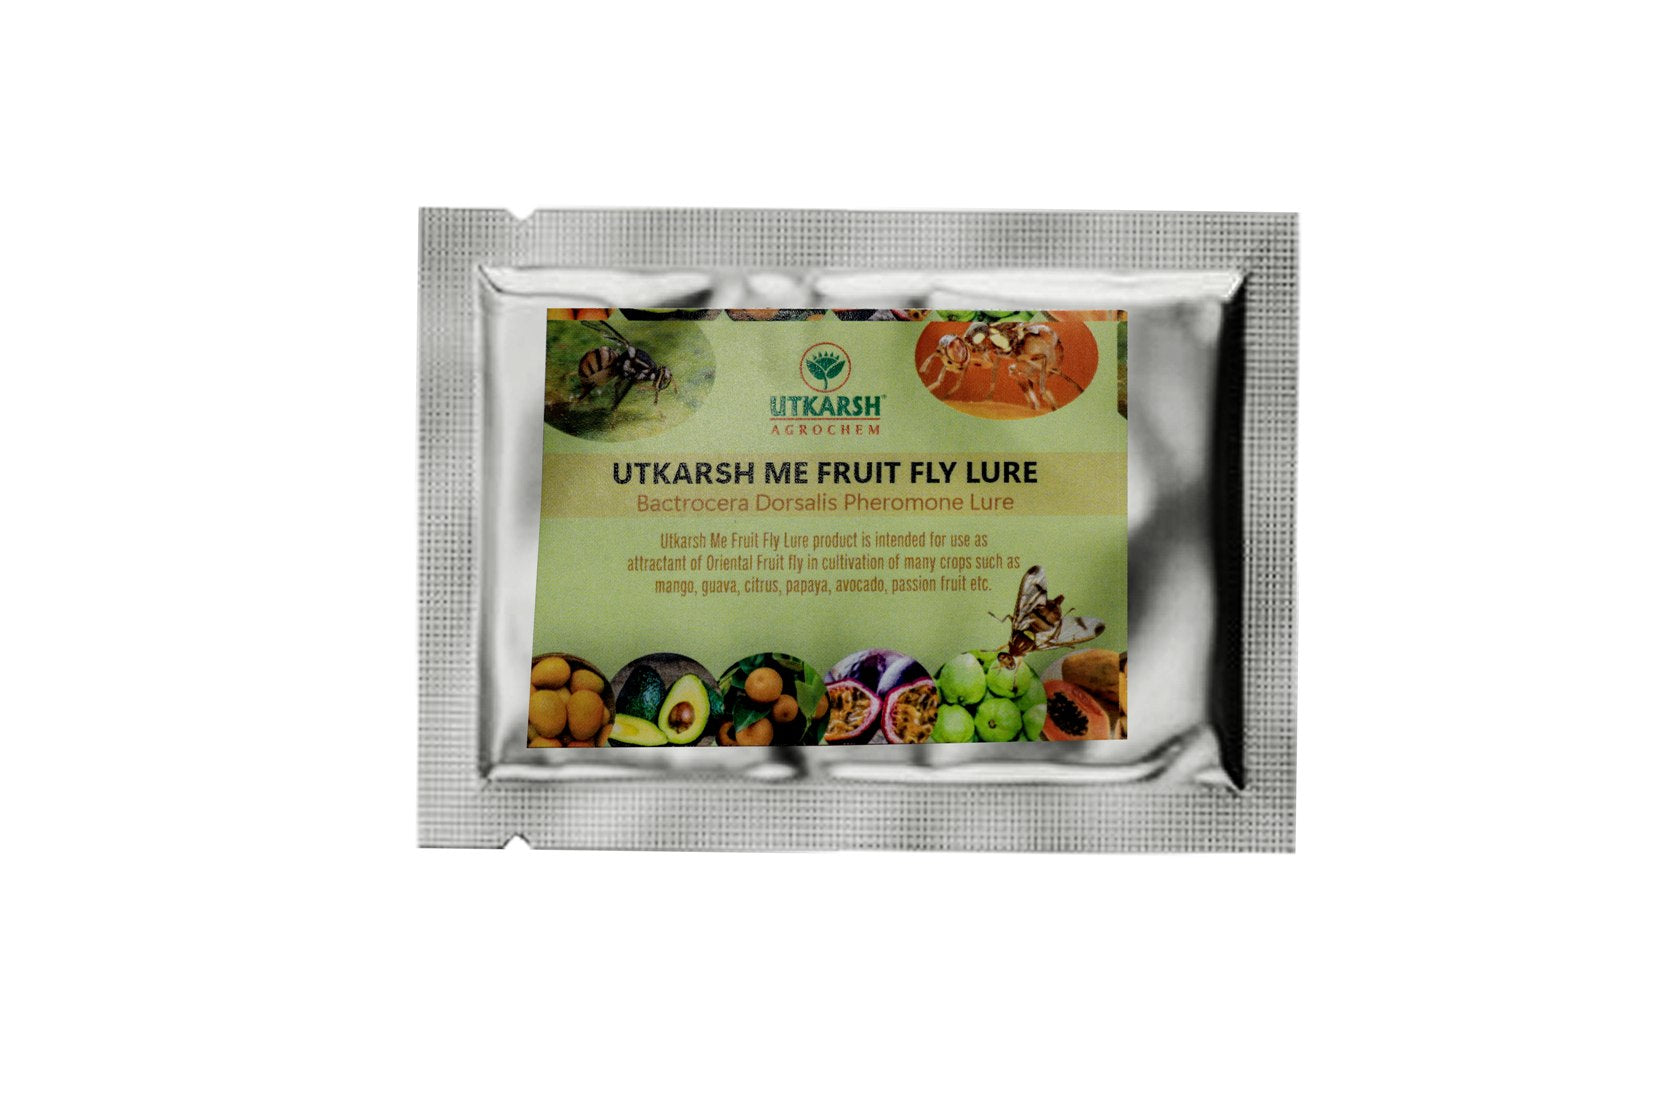 Utkarsh (Oriental) ME Fruit Fly Bactrocera Dorsalis Pheromone Lure for Catching Fruit Fly of Mango, Papaya, Sapota, Guava, Pomegranate, Banana, Water Melon, Citrus, Coffee, Peppers, Sweet Fruit and Other Crops